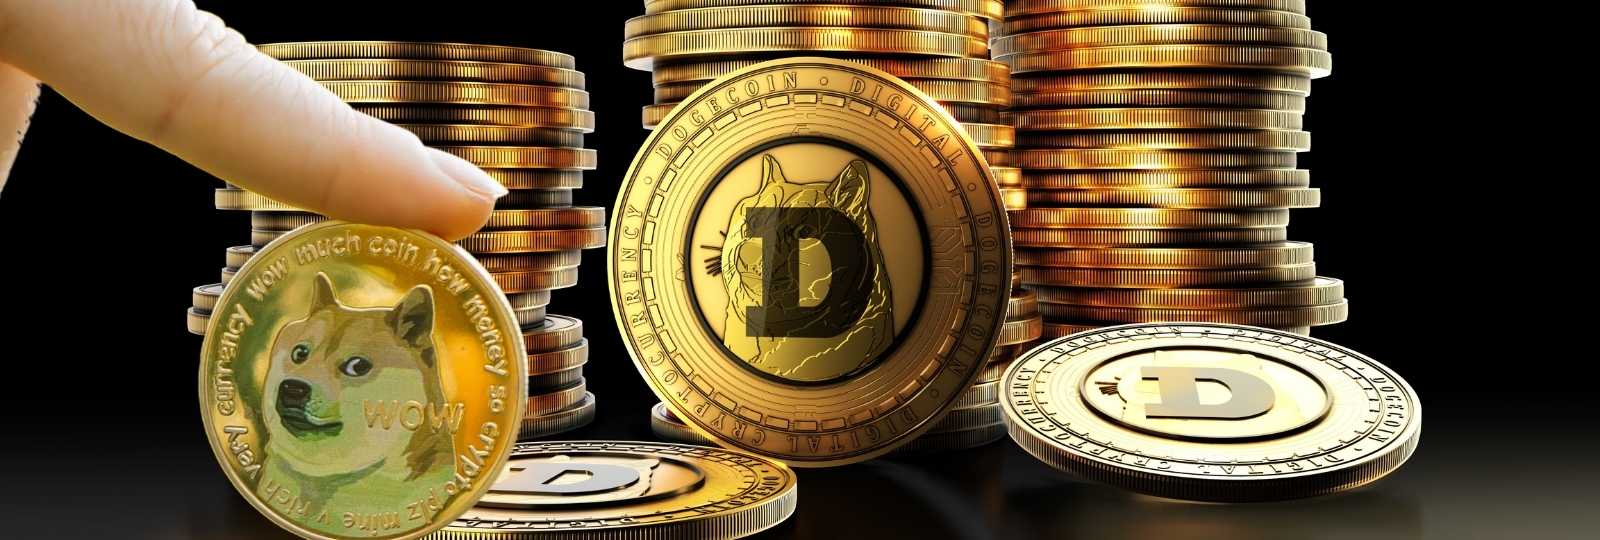 Dogecoin Price Drops; Will DOGE Go Below $0.05